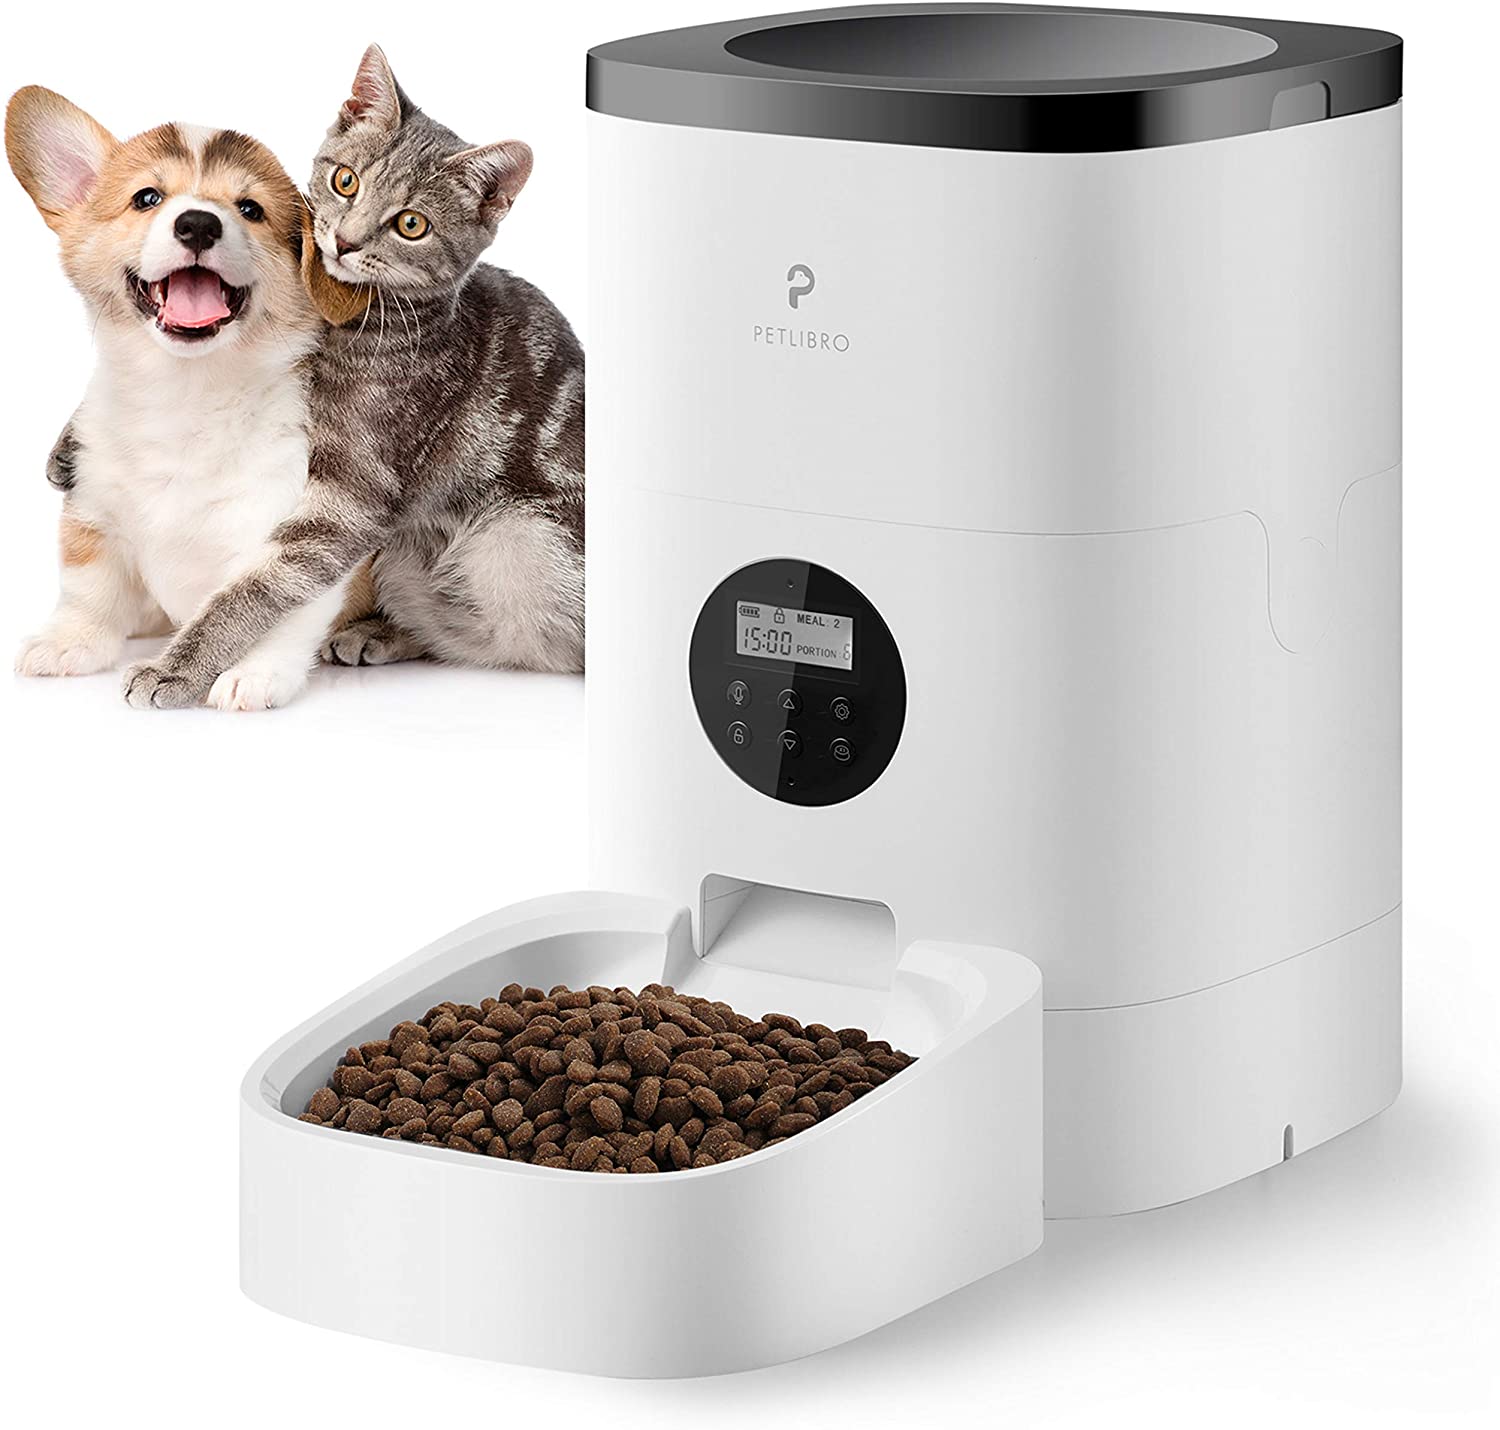 Petlibro Automatic Cat Feeder and Water Fountain Review